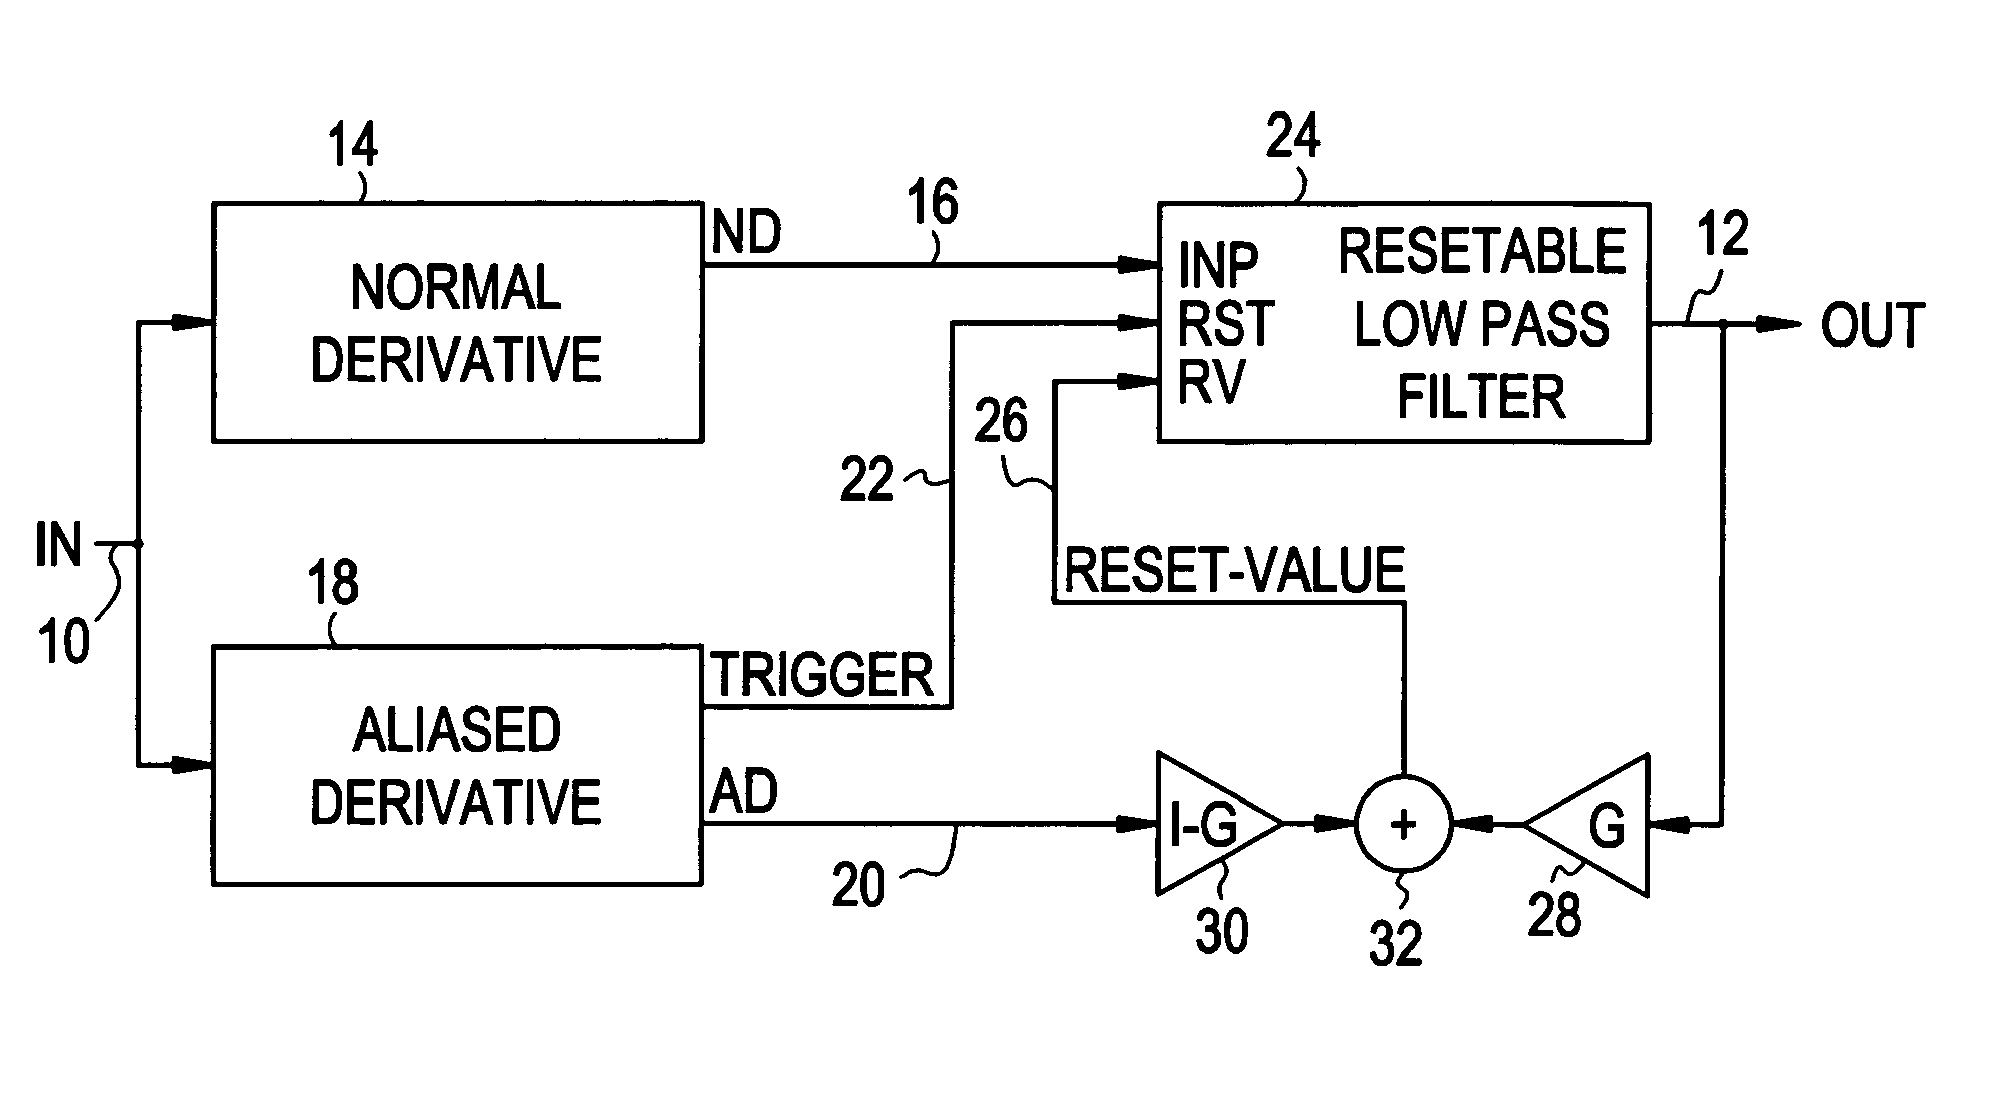 Method of determining the derivative of an input signal